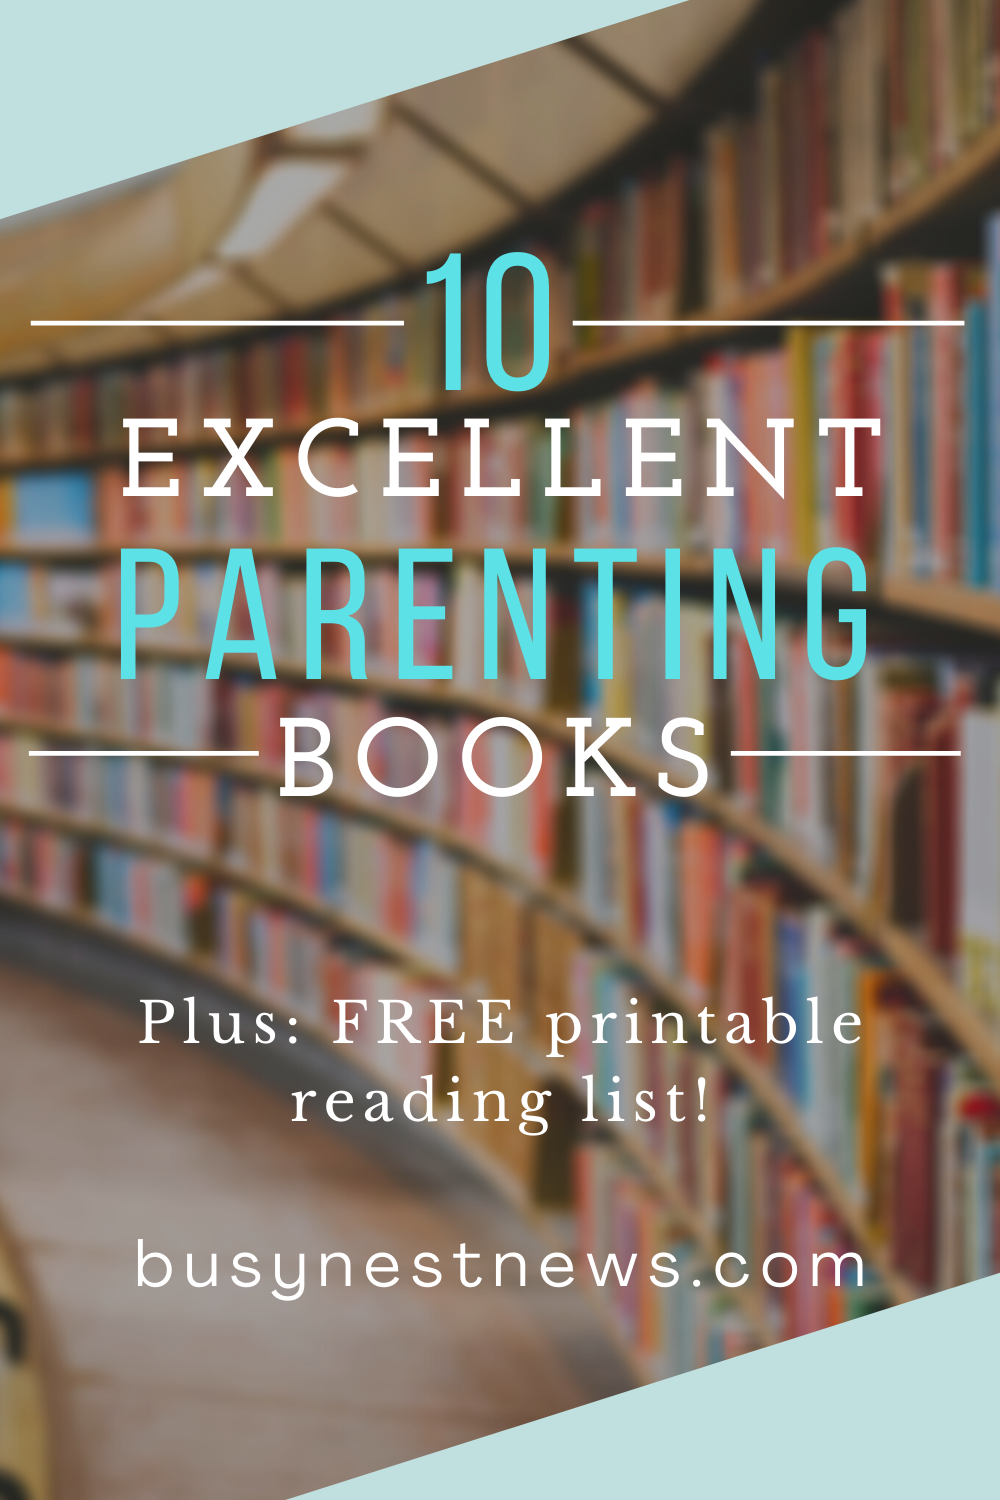 A printable list of 10 great parenting books for any stage